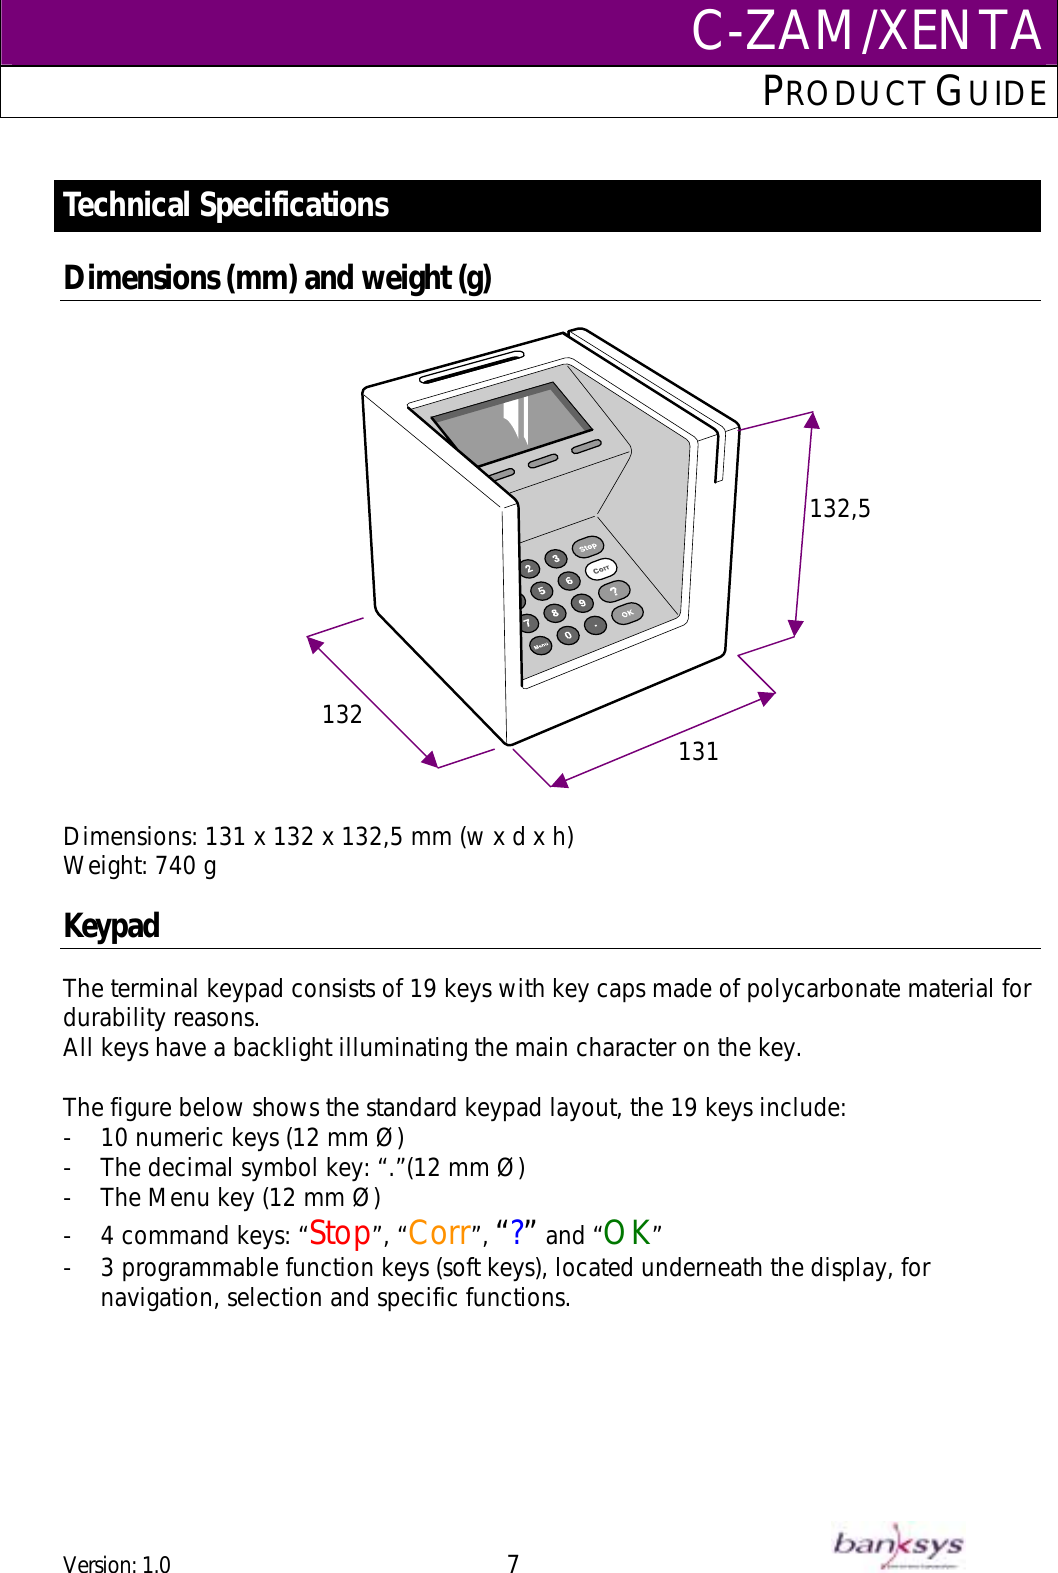 C-ZAM/XENTAPRODUCT GUIDE   Technical Specifications  Dimensions (mm) and weight (g)   132  131132,5   Dimensions: 131 x 132 x 132,5 mm (w x d x h) Weight: 740 g   Keypad The terminal keypad consists of 19 keys with key caps made of polycarbonate material for durability reasons. All keys have a backlight illuminating the main character on the key.   The figure below shows the standard keypad layout, the 19 keys include: -  10 numeric keys (12 mm Ø) -  The decimal symbol key: “.”(12 mm Ø) -  The Menu key (12 mm Ø) -  4 command keys: “Stop”, “Corr”, “?” and “OK” -  3 programmable function keys (soft keys), located underneath the display, for navigation, selection and specific functions. Version: 1.0 7      